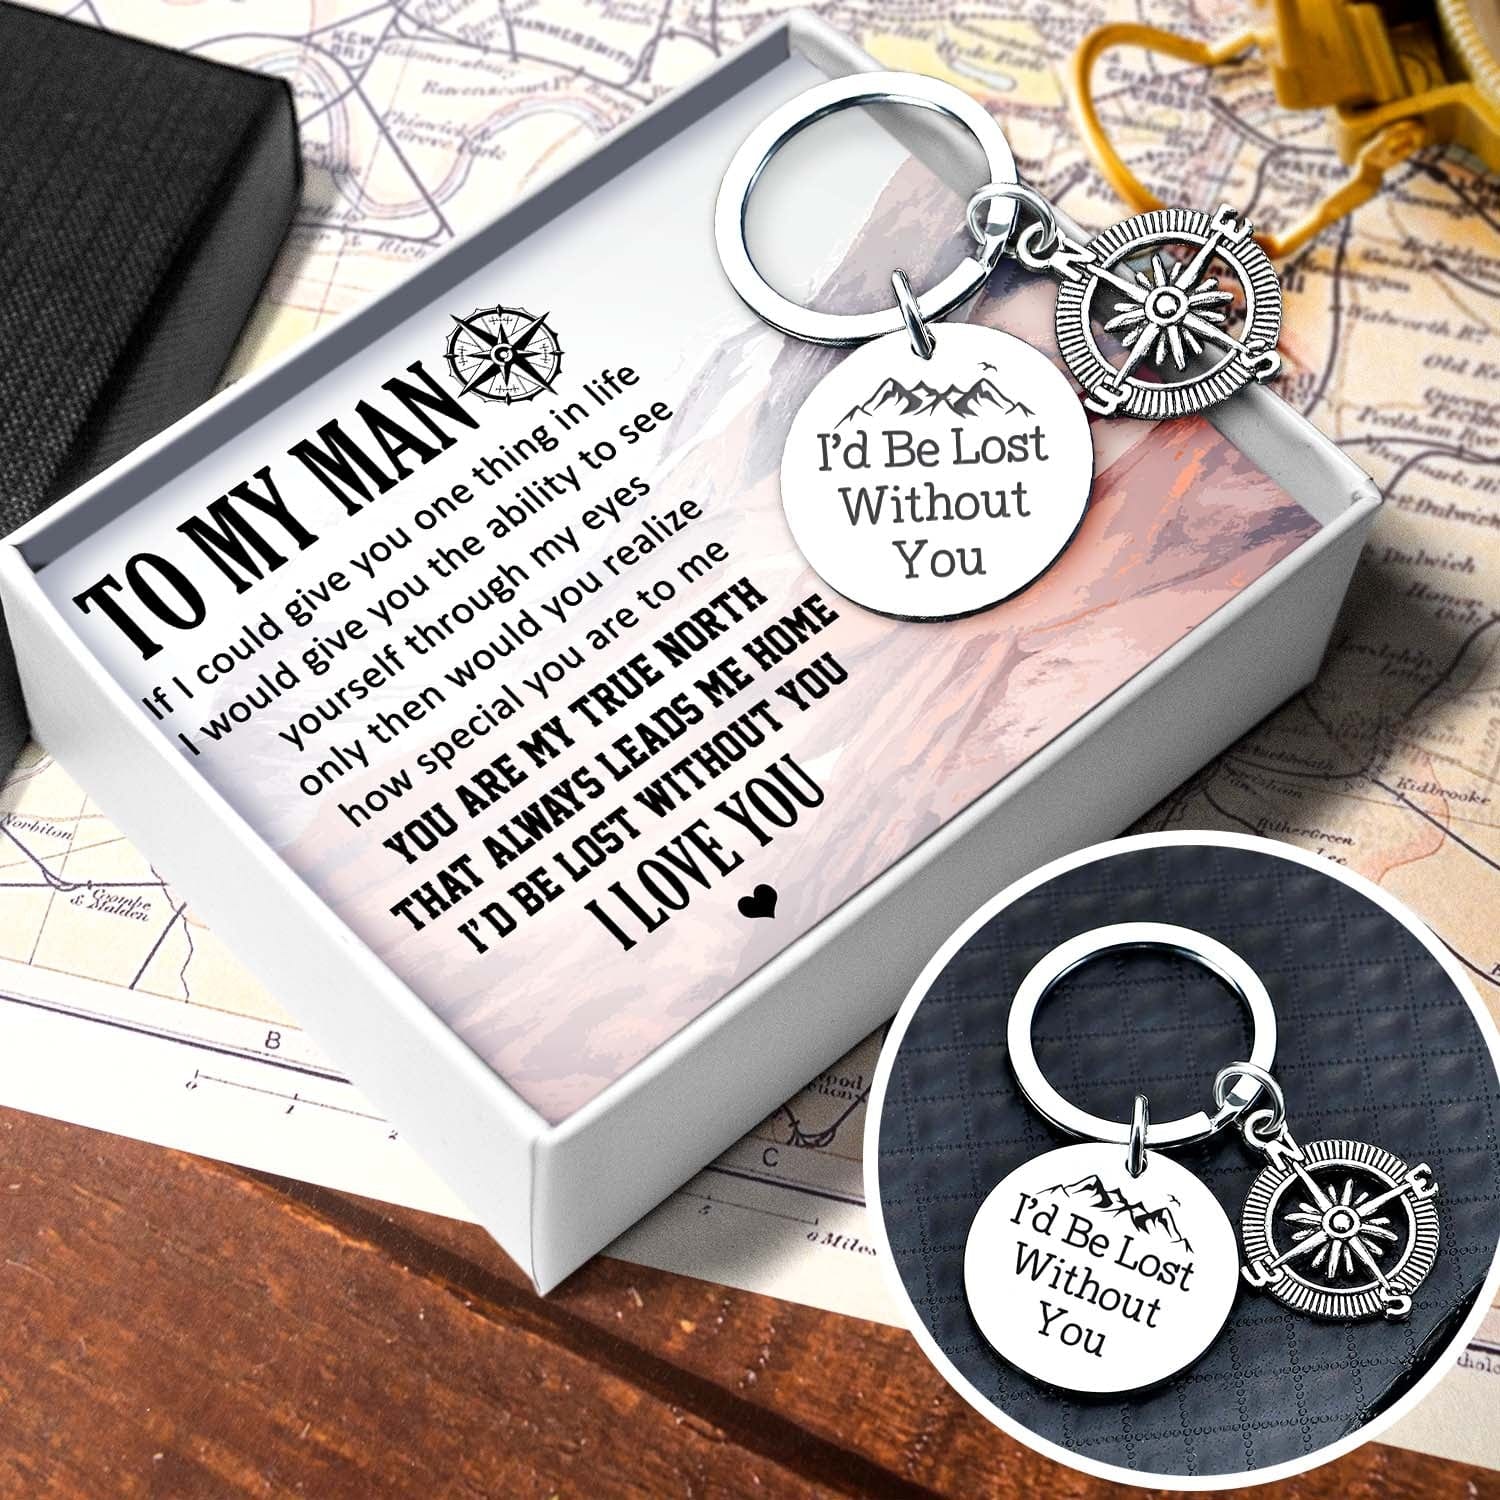 Compass Keychain - Travel - To My Man - I Love You - Gkw26024